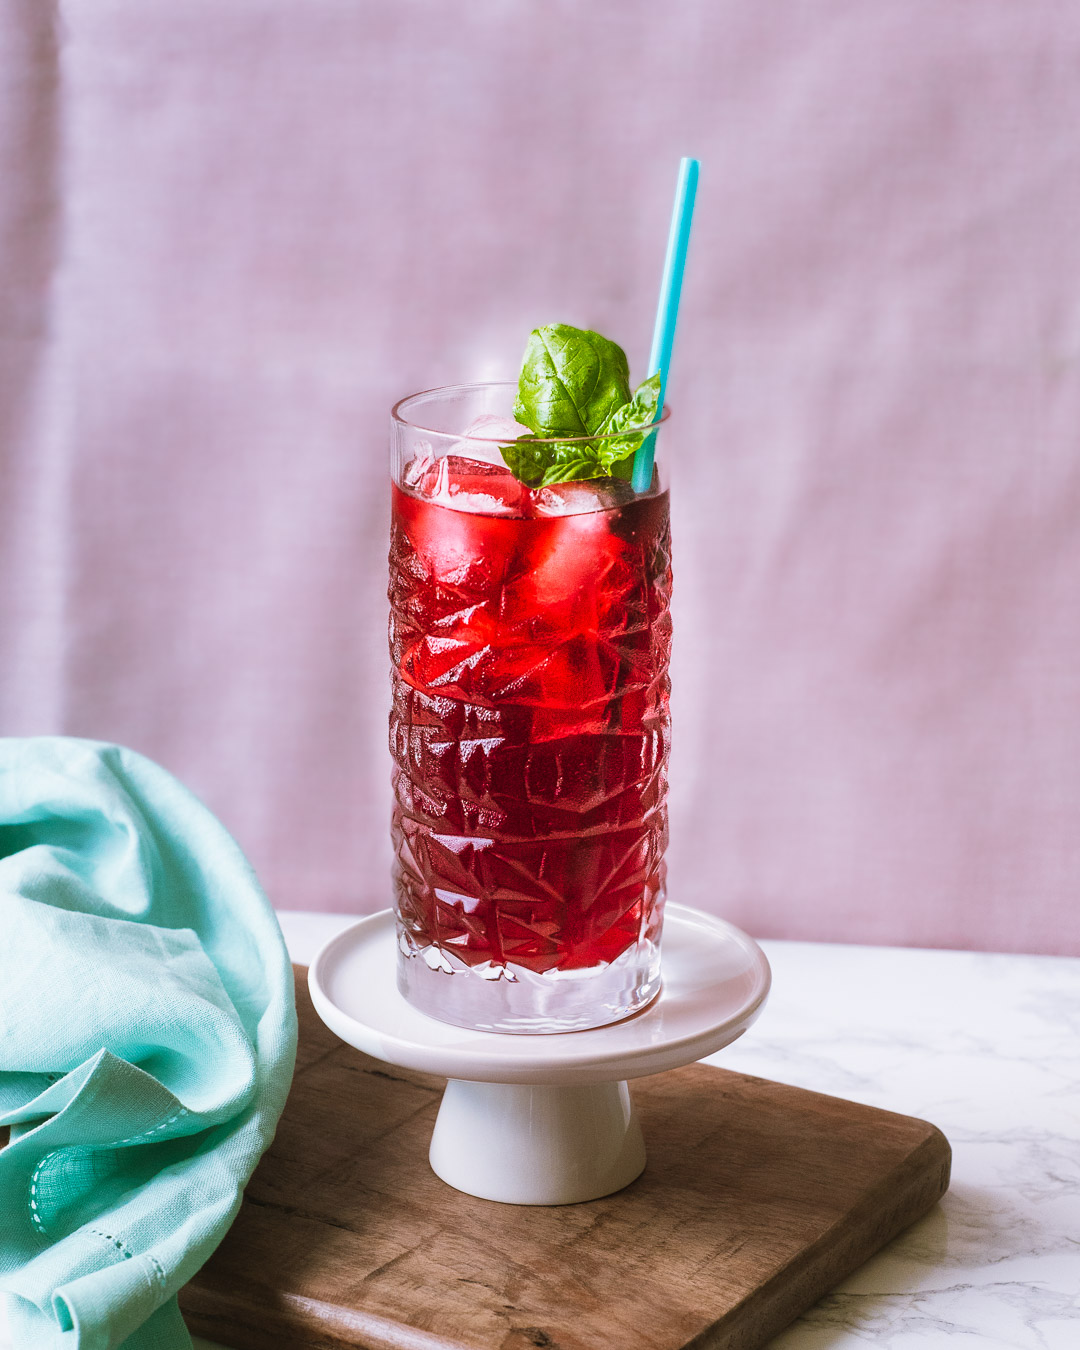 Tall glass with red iced tea and a basil garnish